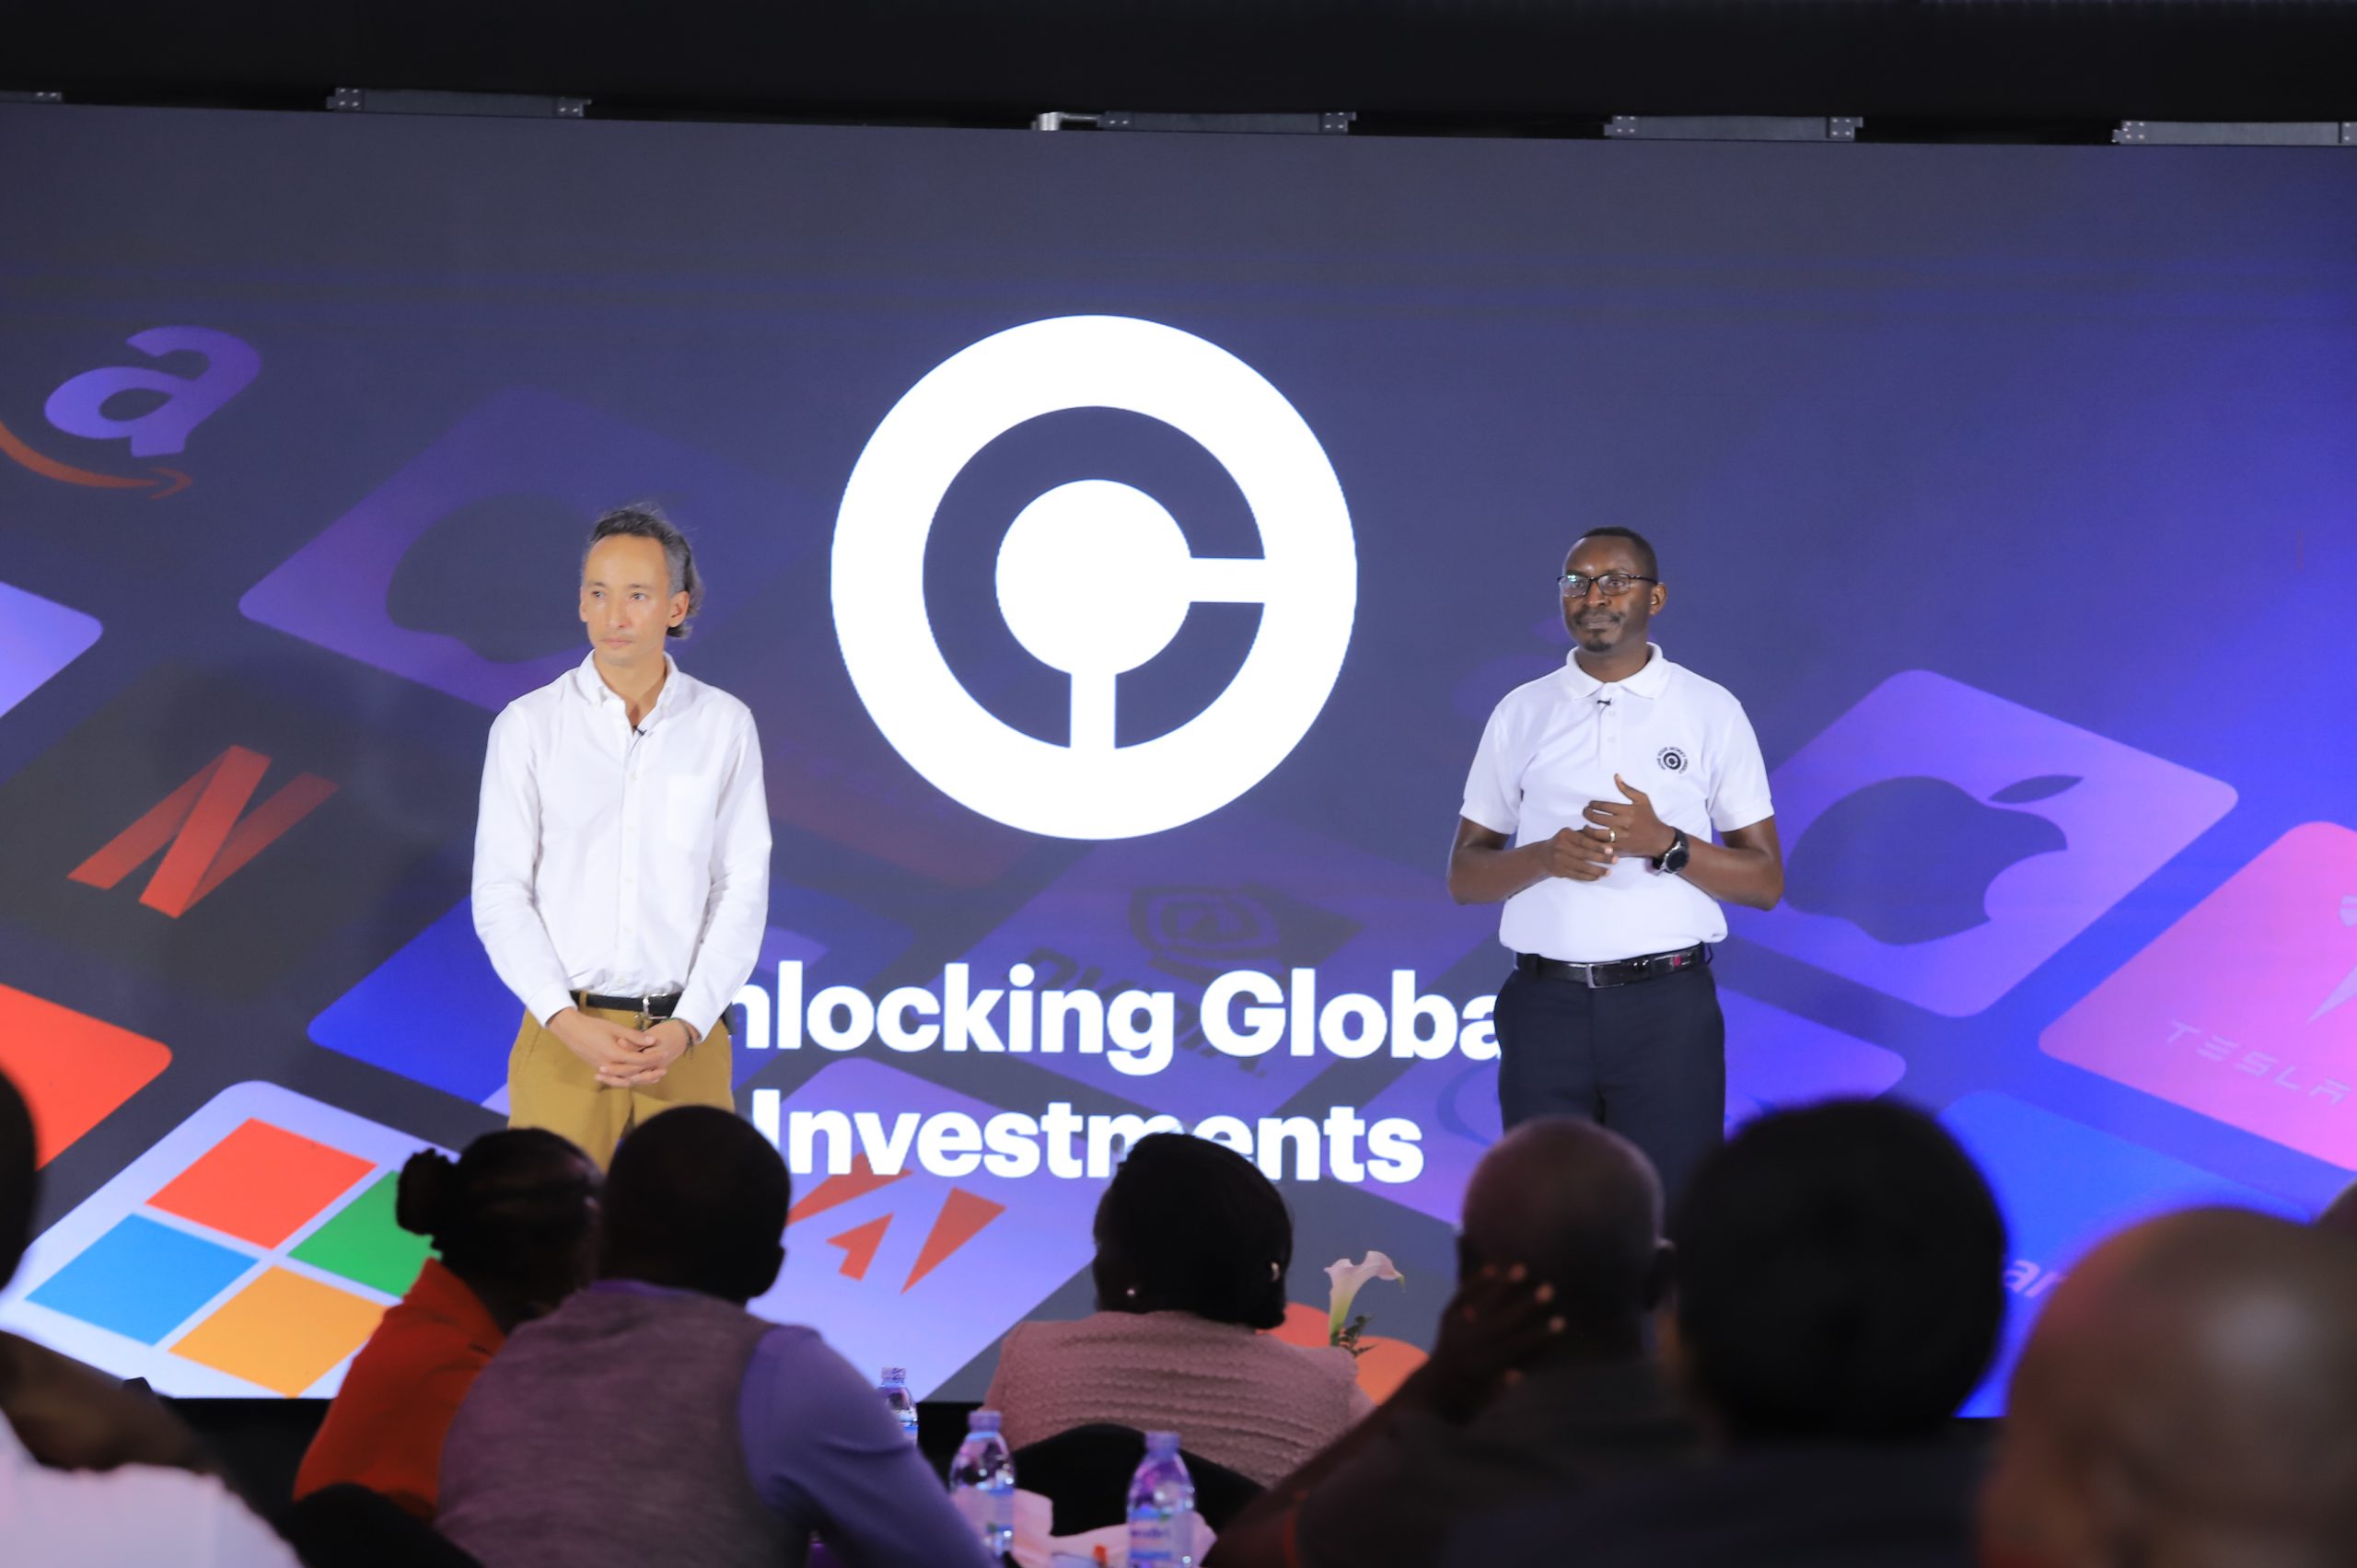 Ugandans Can Now Invest in Global Companies Starting With Just $1, Here is How